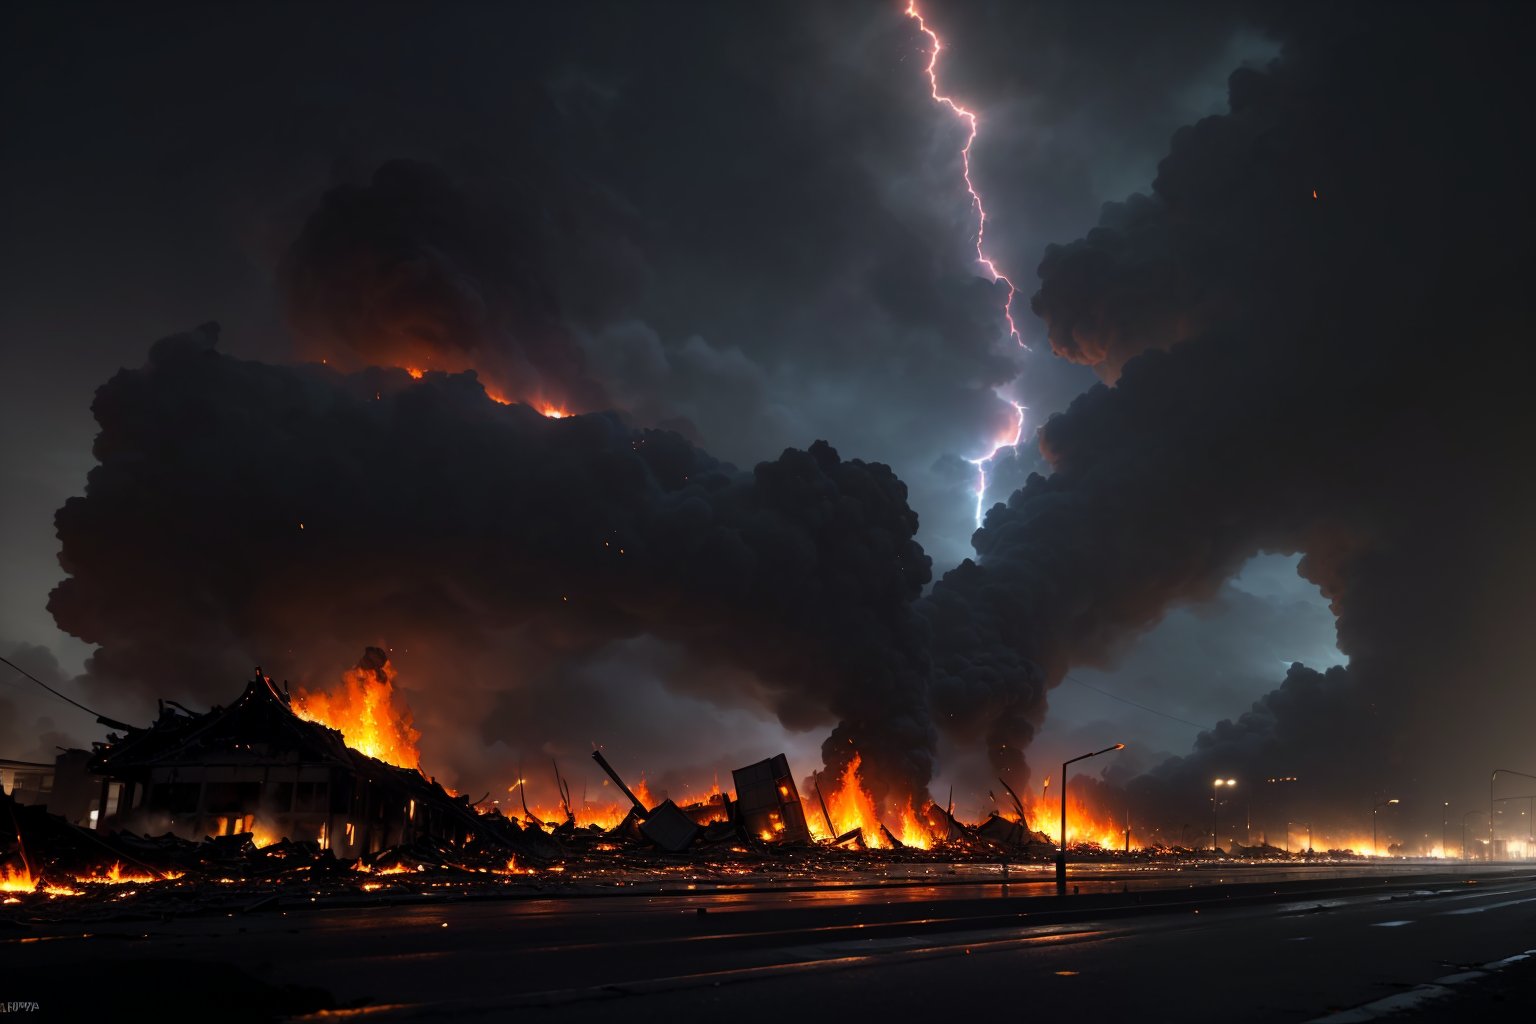 (((((Viewed_from_street:1.7))))),(((((dark_sky_with_lightning:1.7))))),(((((((burning_whole_Phnom_Penh_city_with_huge_larva_fire,ground_cracking,burning_buildings_falling_down:1.7))))))),4K cinematic quality reminiscent of an epic Steven Spielberg movie still, sharp focus on emitting diodes, smoke tendrils, artillery-induced sparks, with detailed racks and a motherboard evoking Pascal Blanche and Rutkowski Repin’s ArtStation hyperrealism, matte painting, character design detailed in the style of "Blade Runner," octane rendering